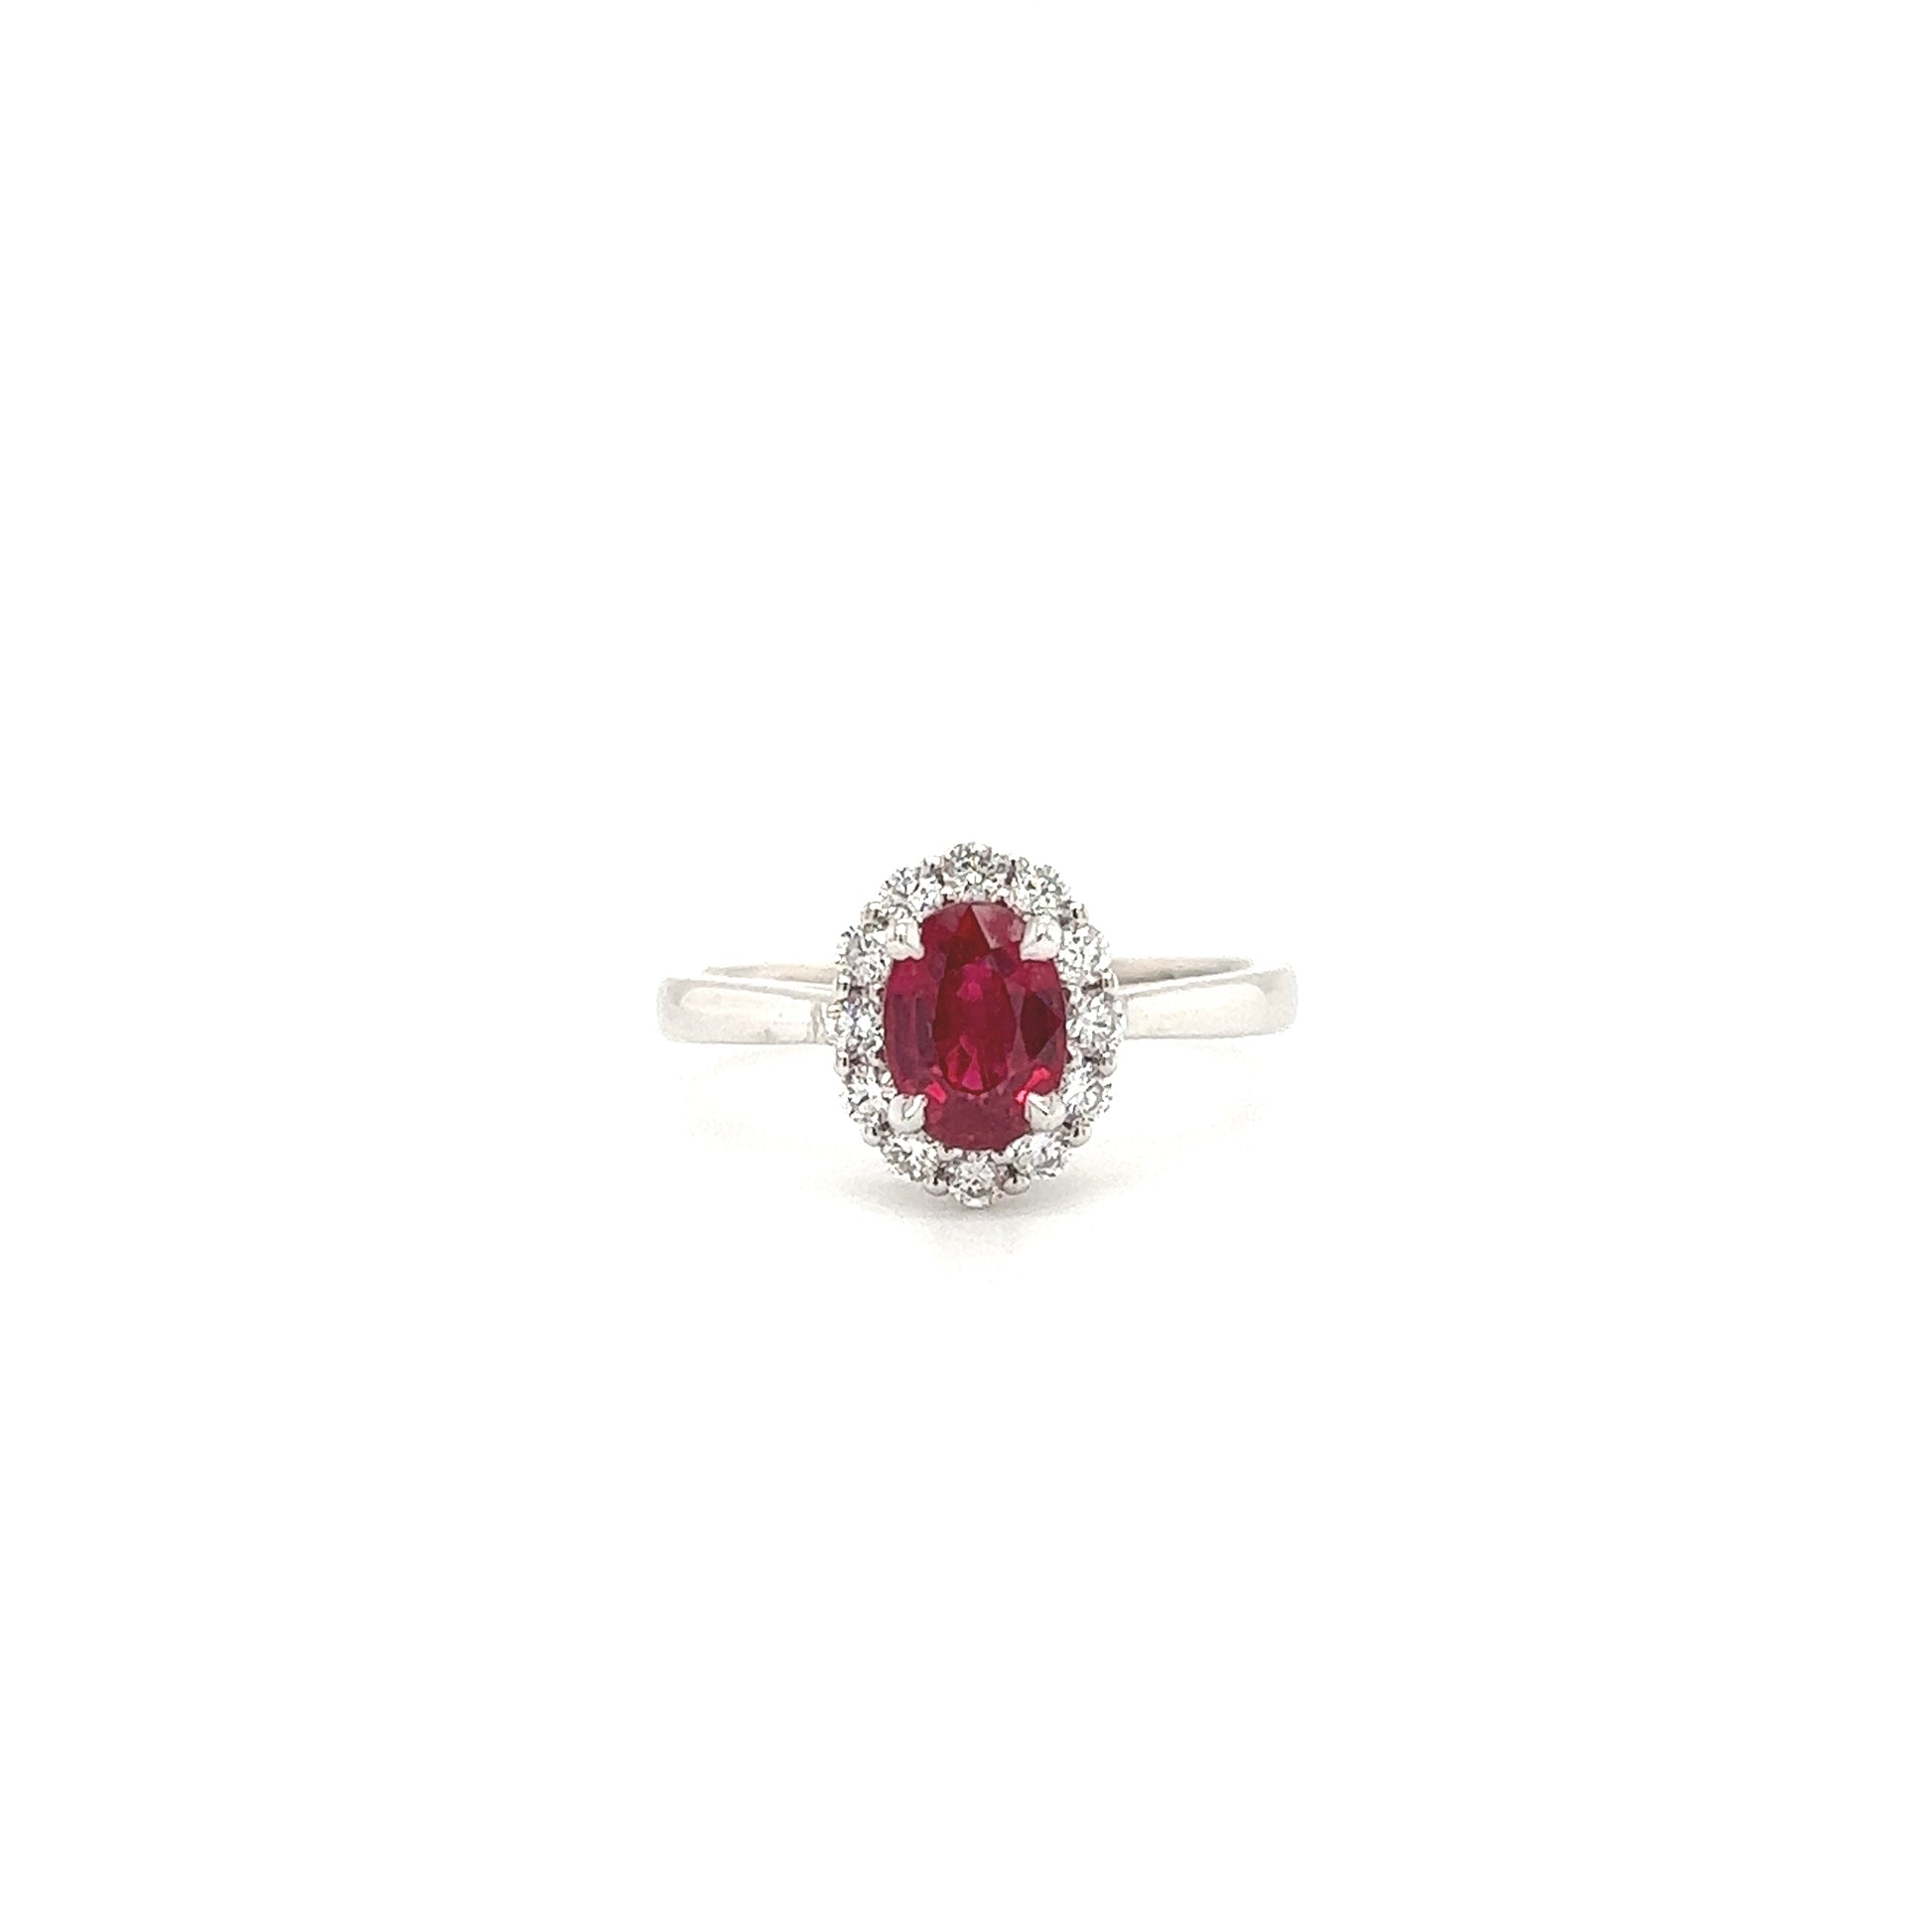 Oval Ruby Ring with Diamond Halo in 14K White Gold Front View